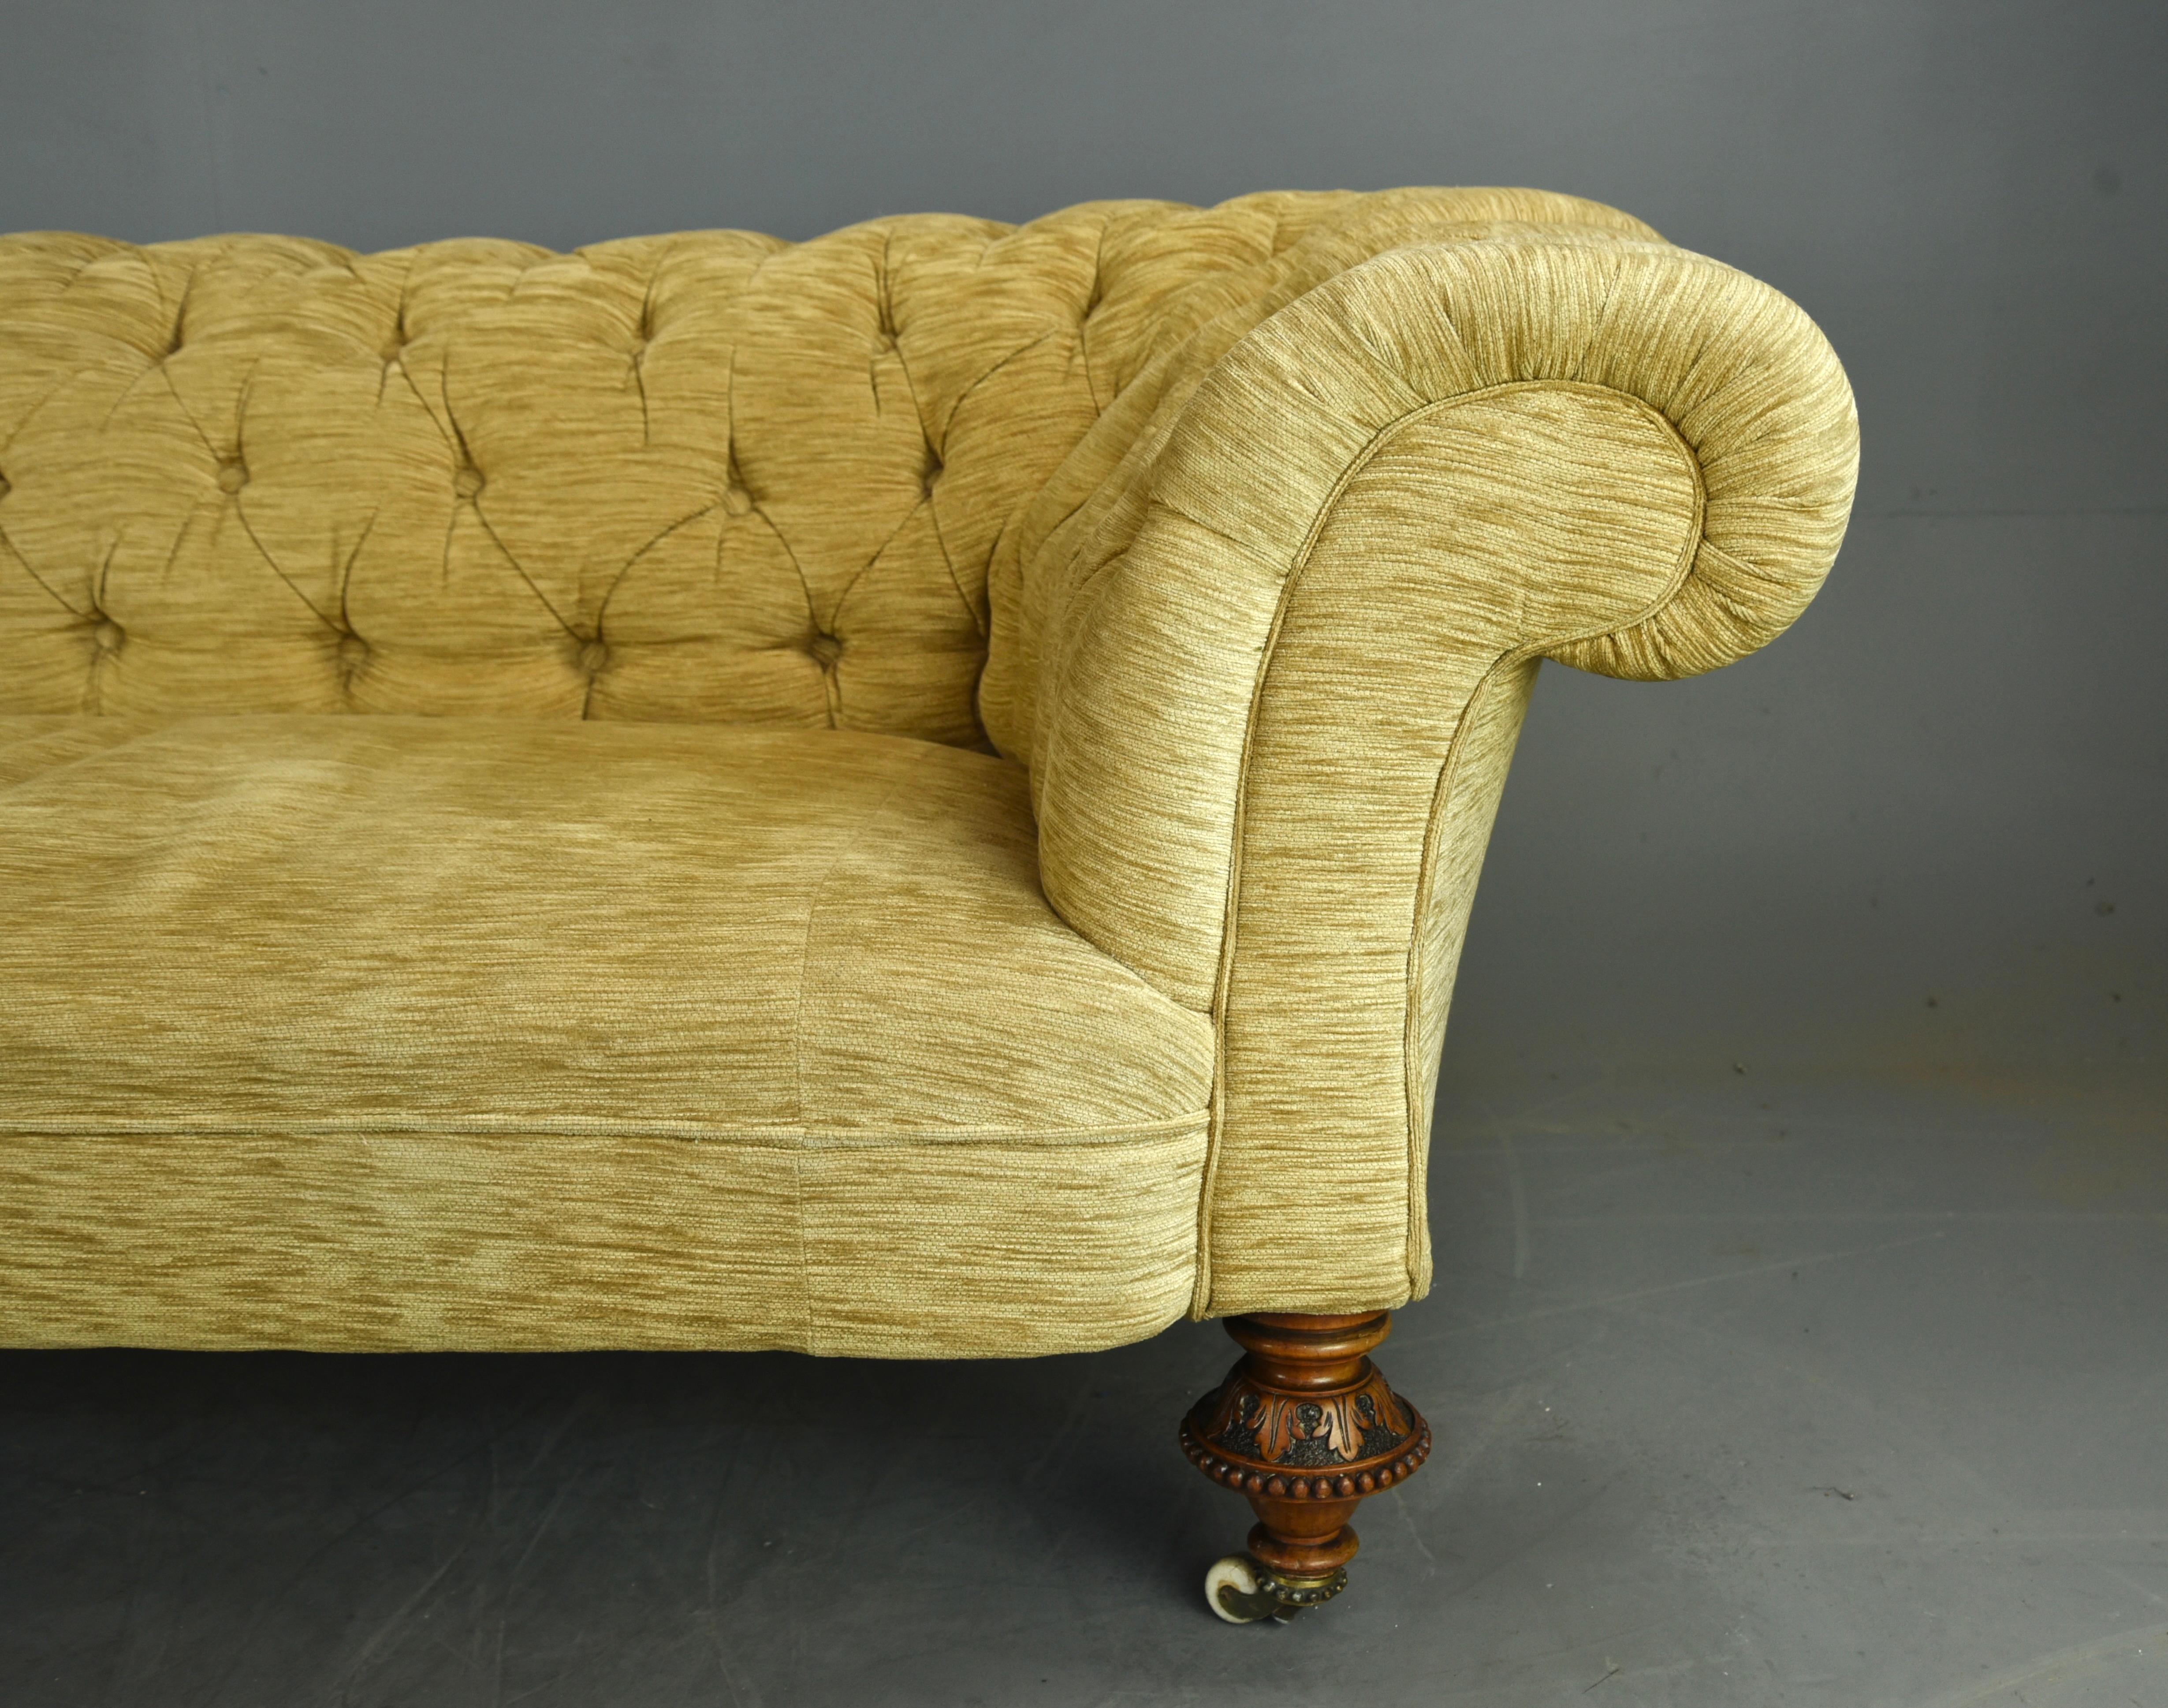 This is an extremely style Mid Victorian Chesterfield sofa that will seat 3 to 4 people with comfort.
The Chesterfield stands on four wonderful turned and carved walnut legs terminating with brass and porcelain cup castors.
It is in fantastic